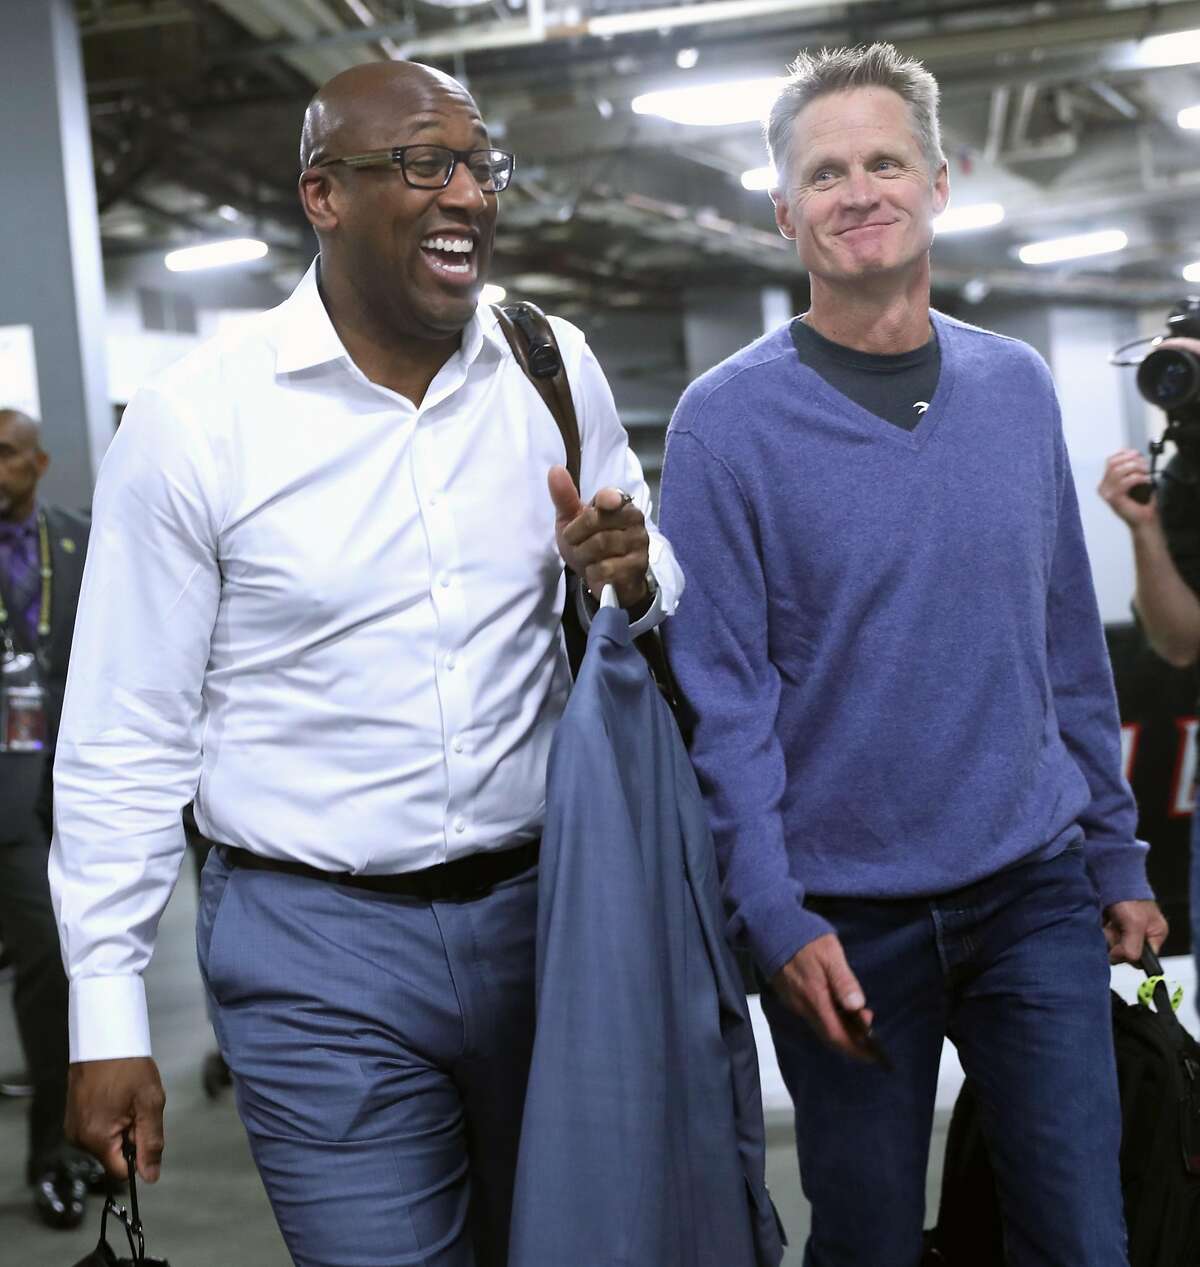 Golden State Warriors' interim head coach Mike Brown and head coach Steve Kerr arrive before playing Portland Trail Blazers in Game 4 of NBA Western Conference 1st Round Playoffs at Moda Center in Portland, Oregon on Monday, April 24, 2017.